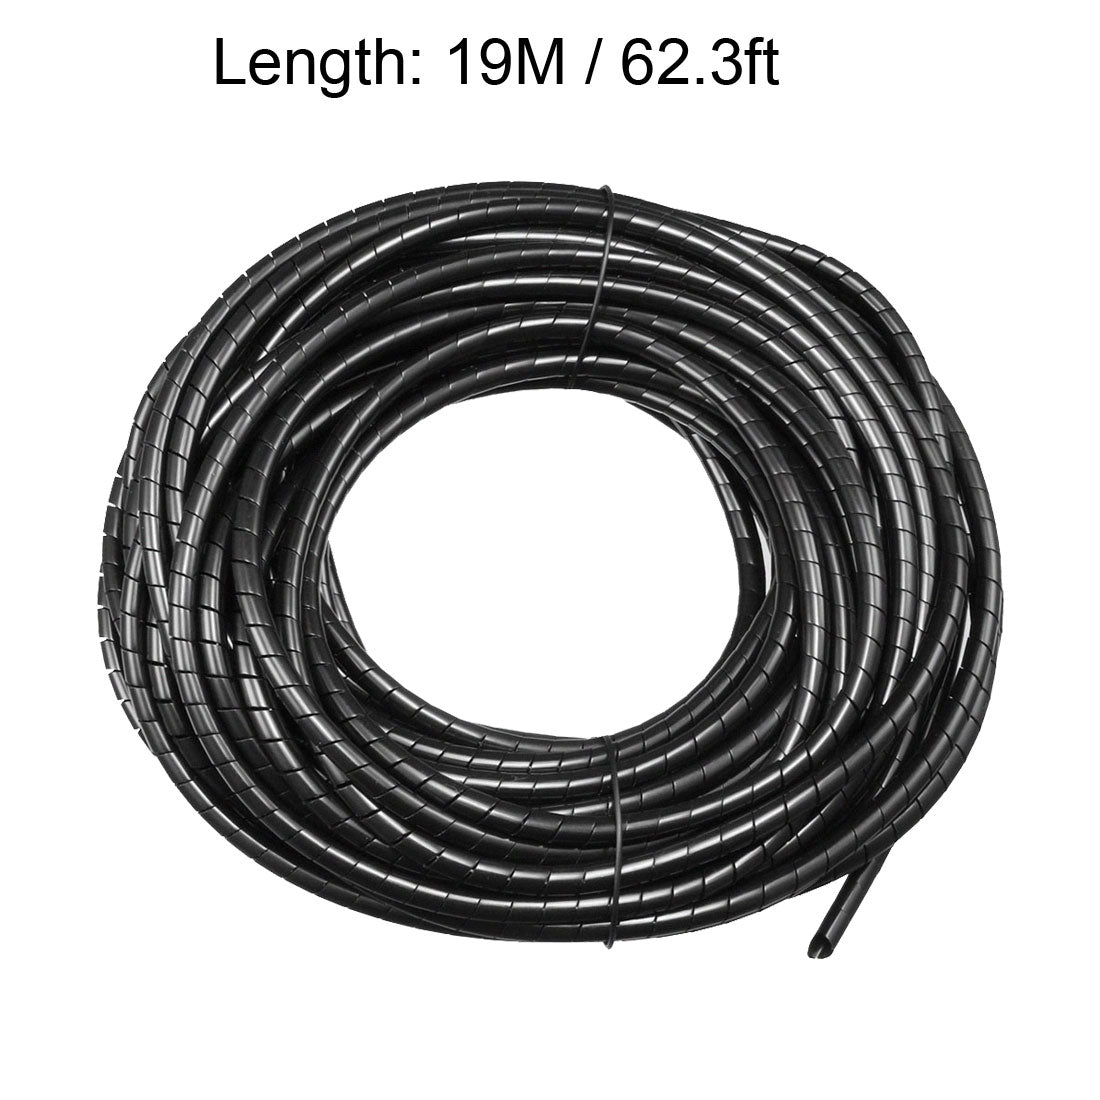 uxcell Uxcell 3mm Flexible Spiral Tube Cable Wire Wrap Manage Cord 19M Length Black